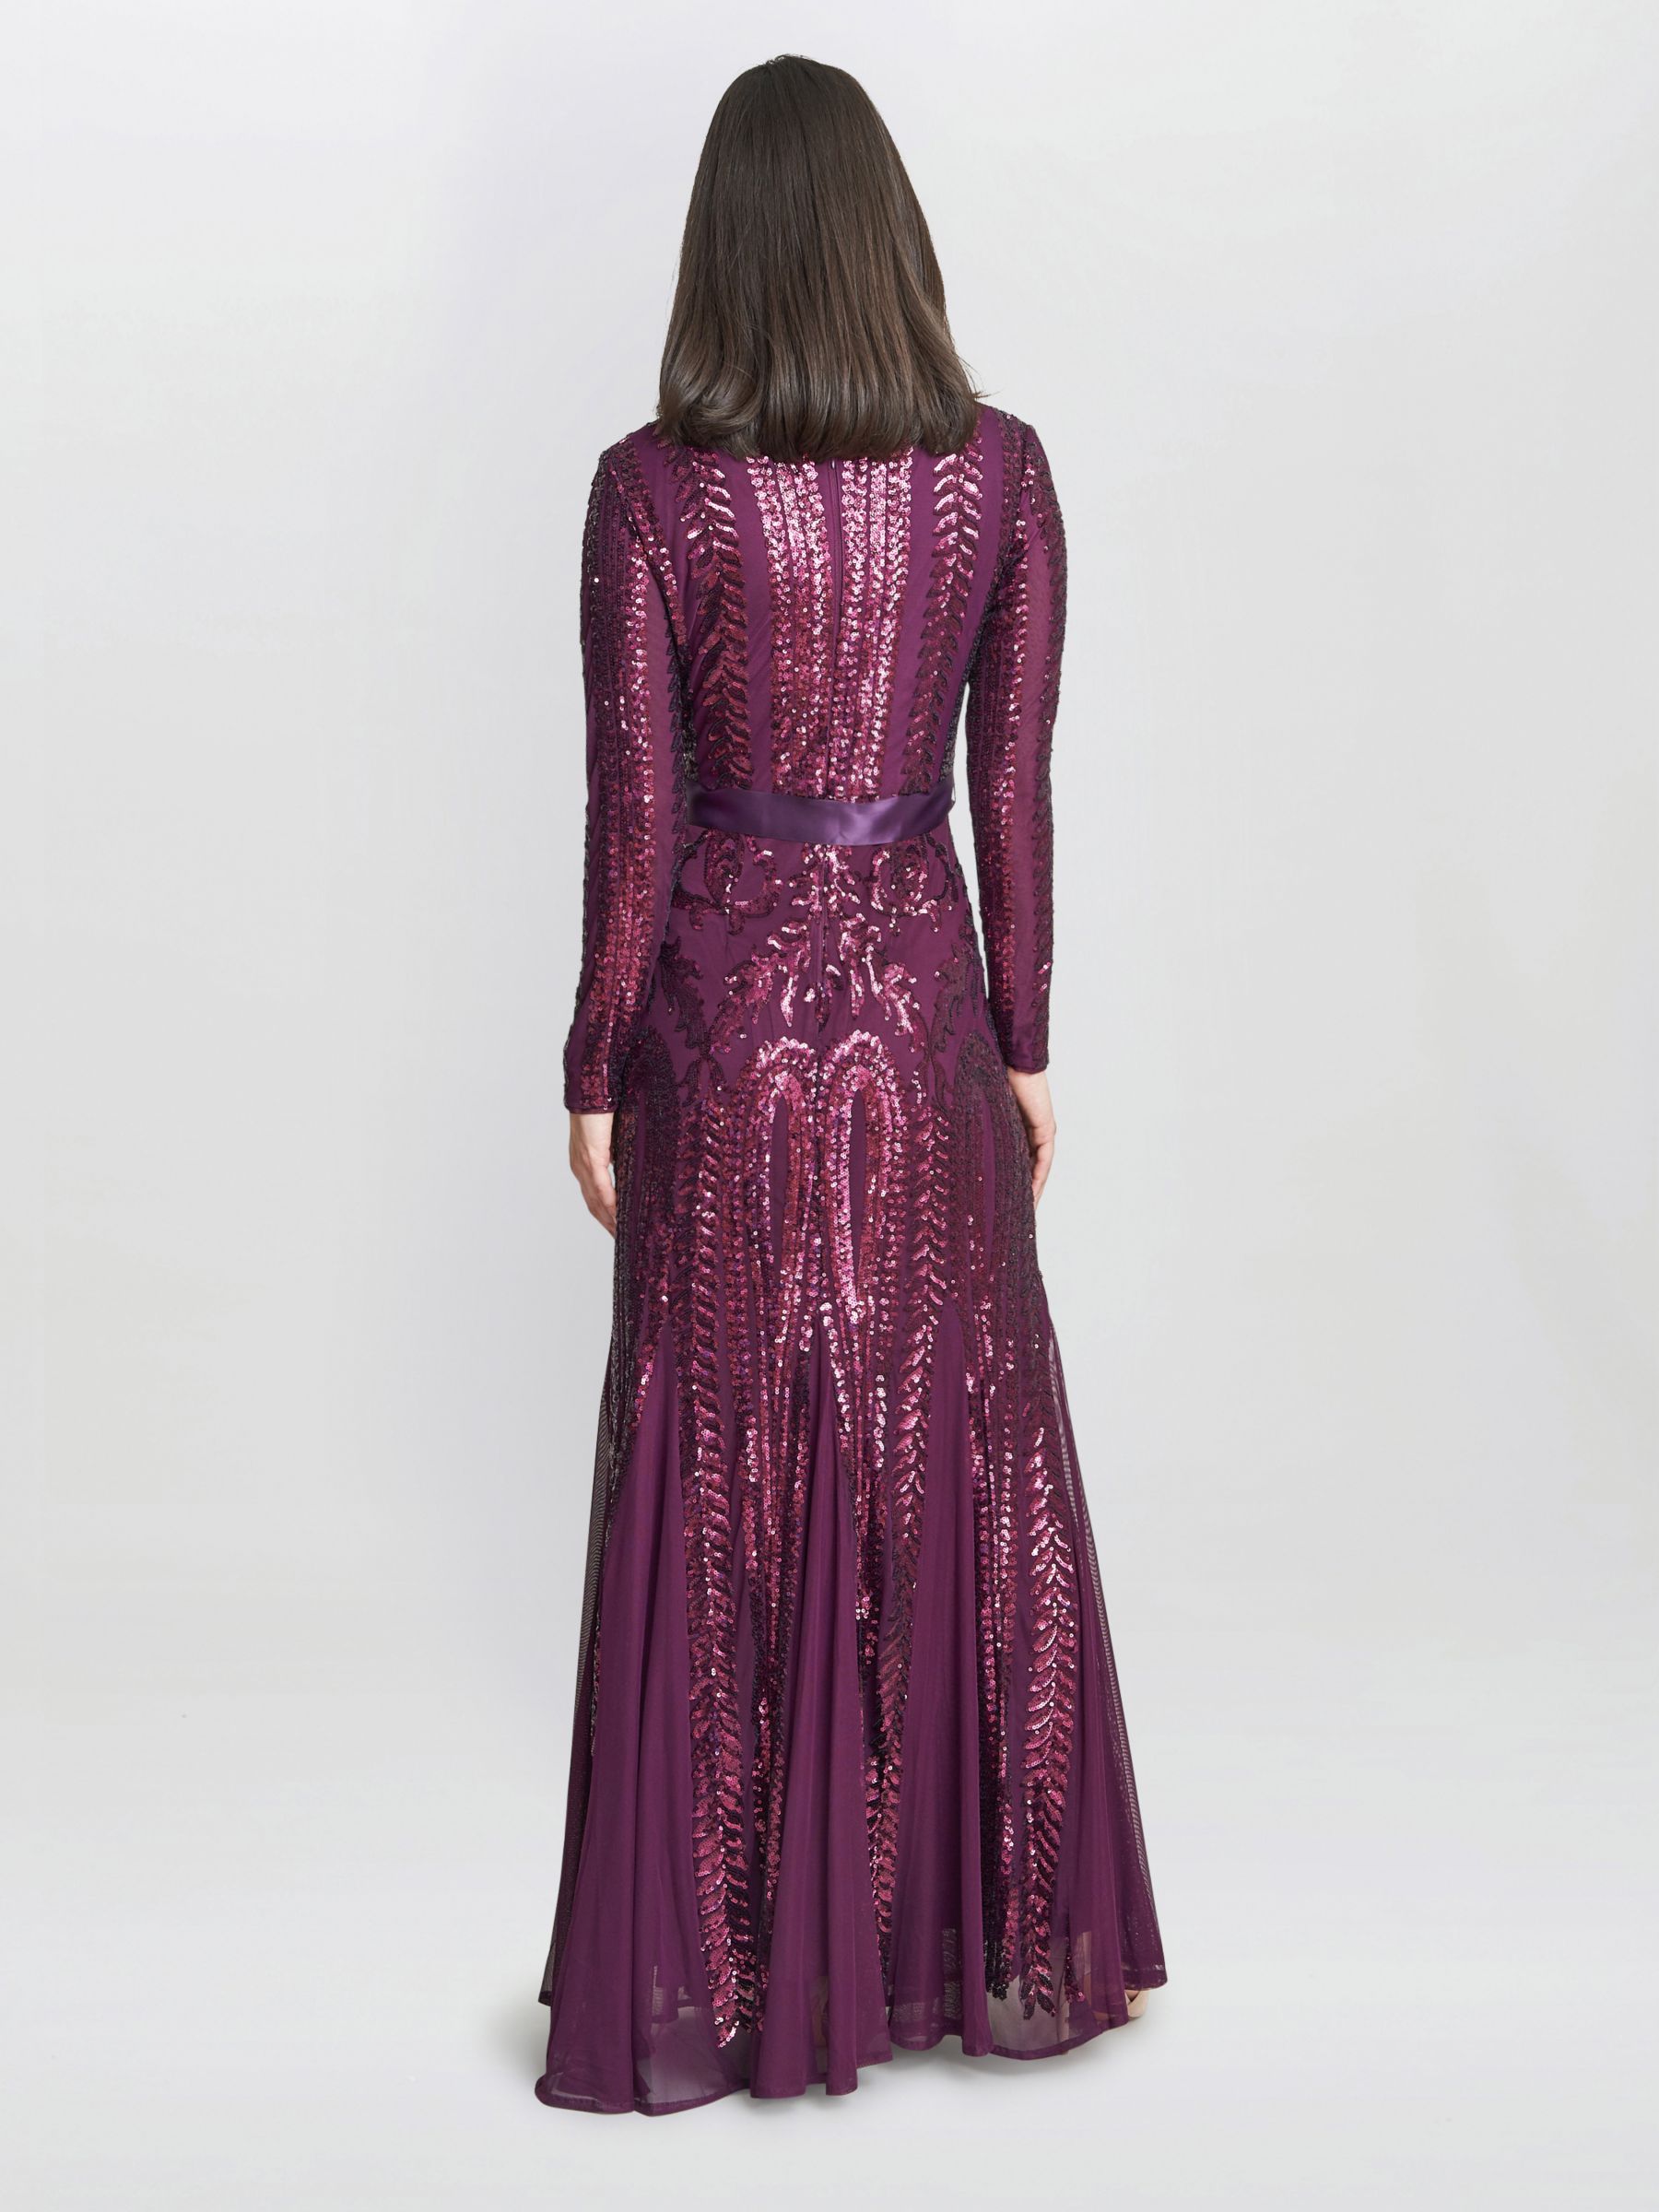 Buy Gina Bacconi Gwen Sequined Gown, Burgundy Online at johnlewis.com